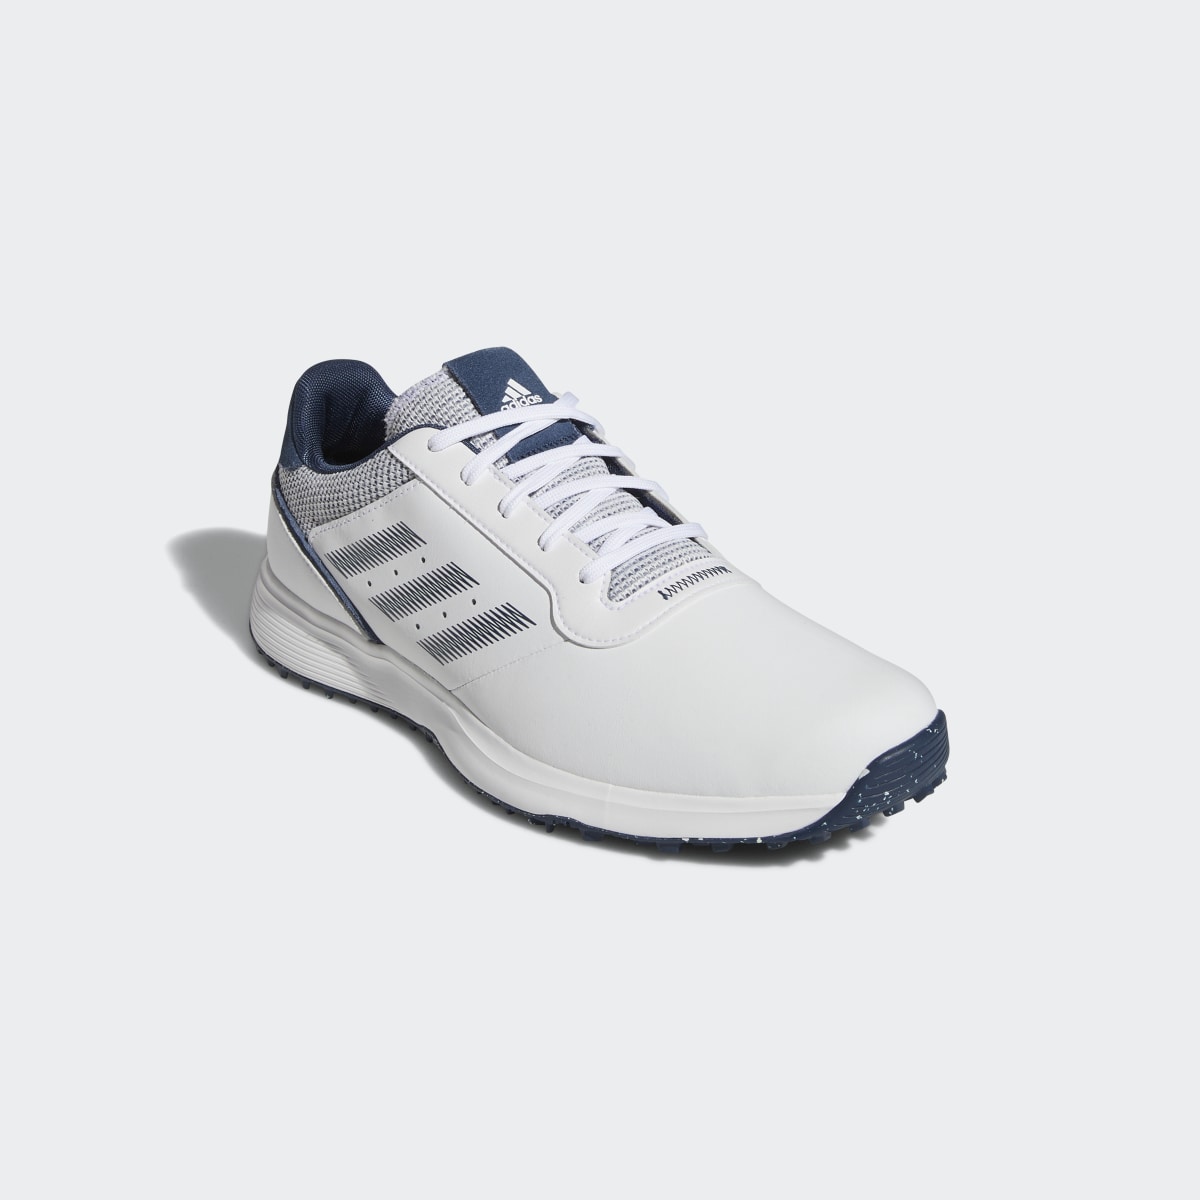 Adidas S2G Spikeless Leather Golf Shoes. 5